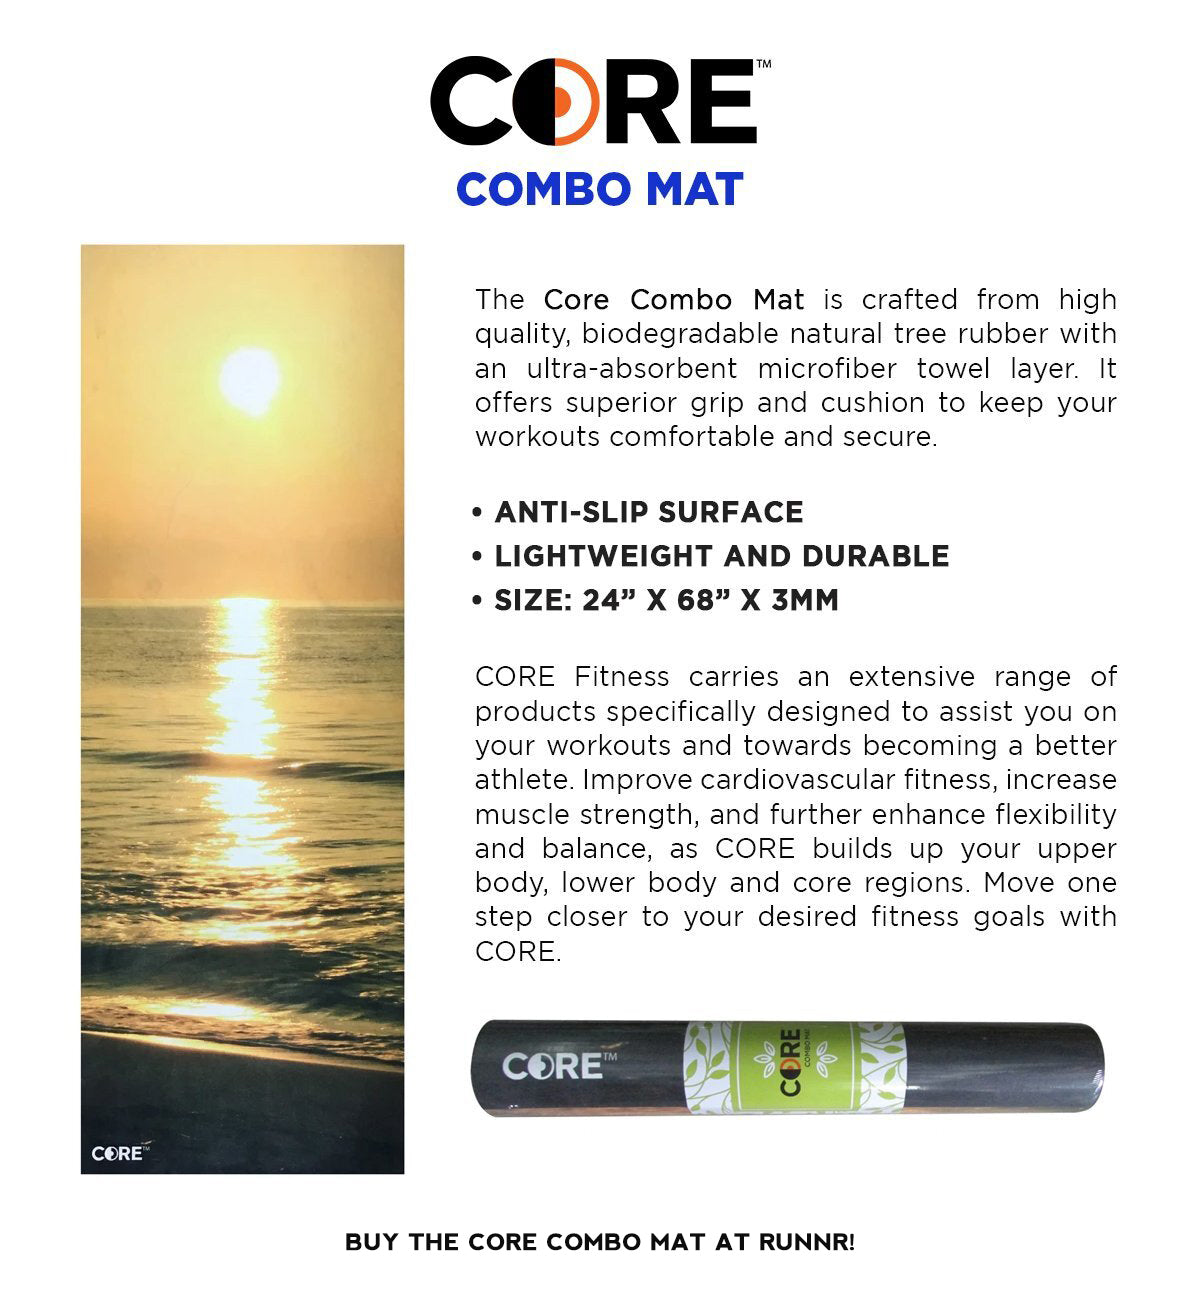 Core yoga mat is crafted from high quality, biodegradable natural tree rubber with an ultra-absorbent microfbiber layer